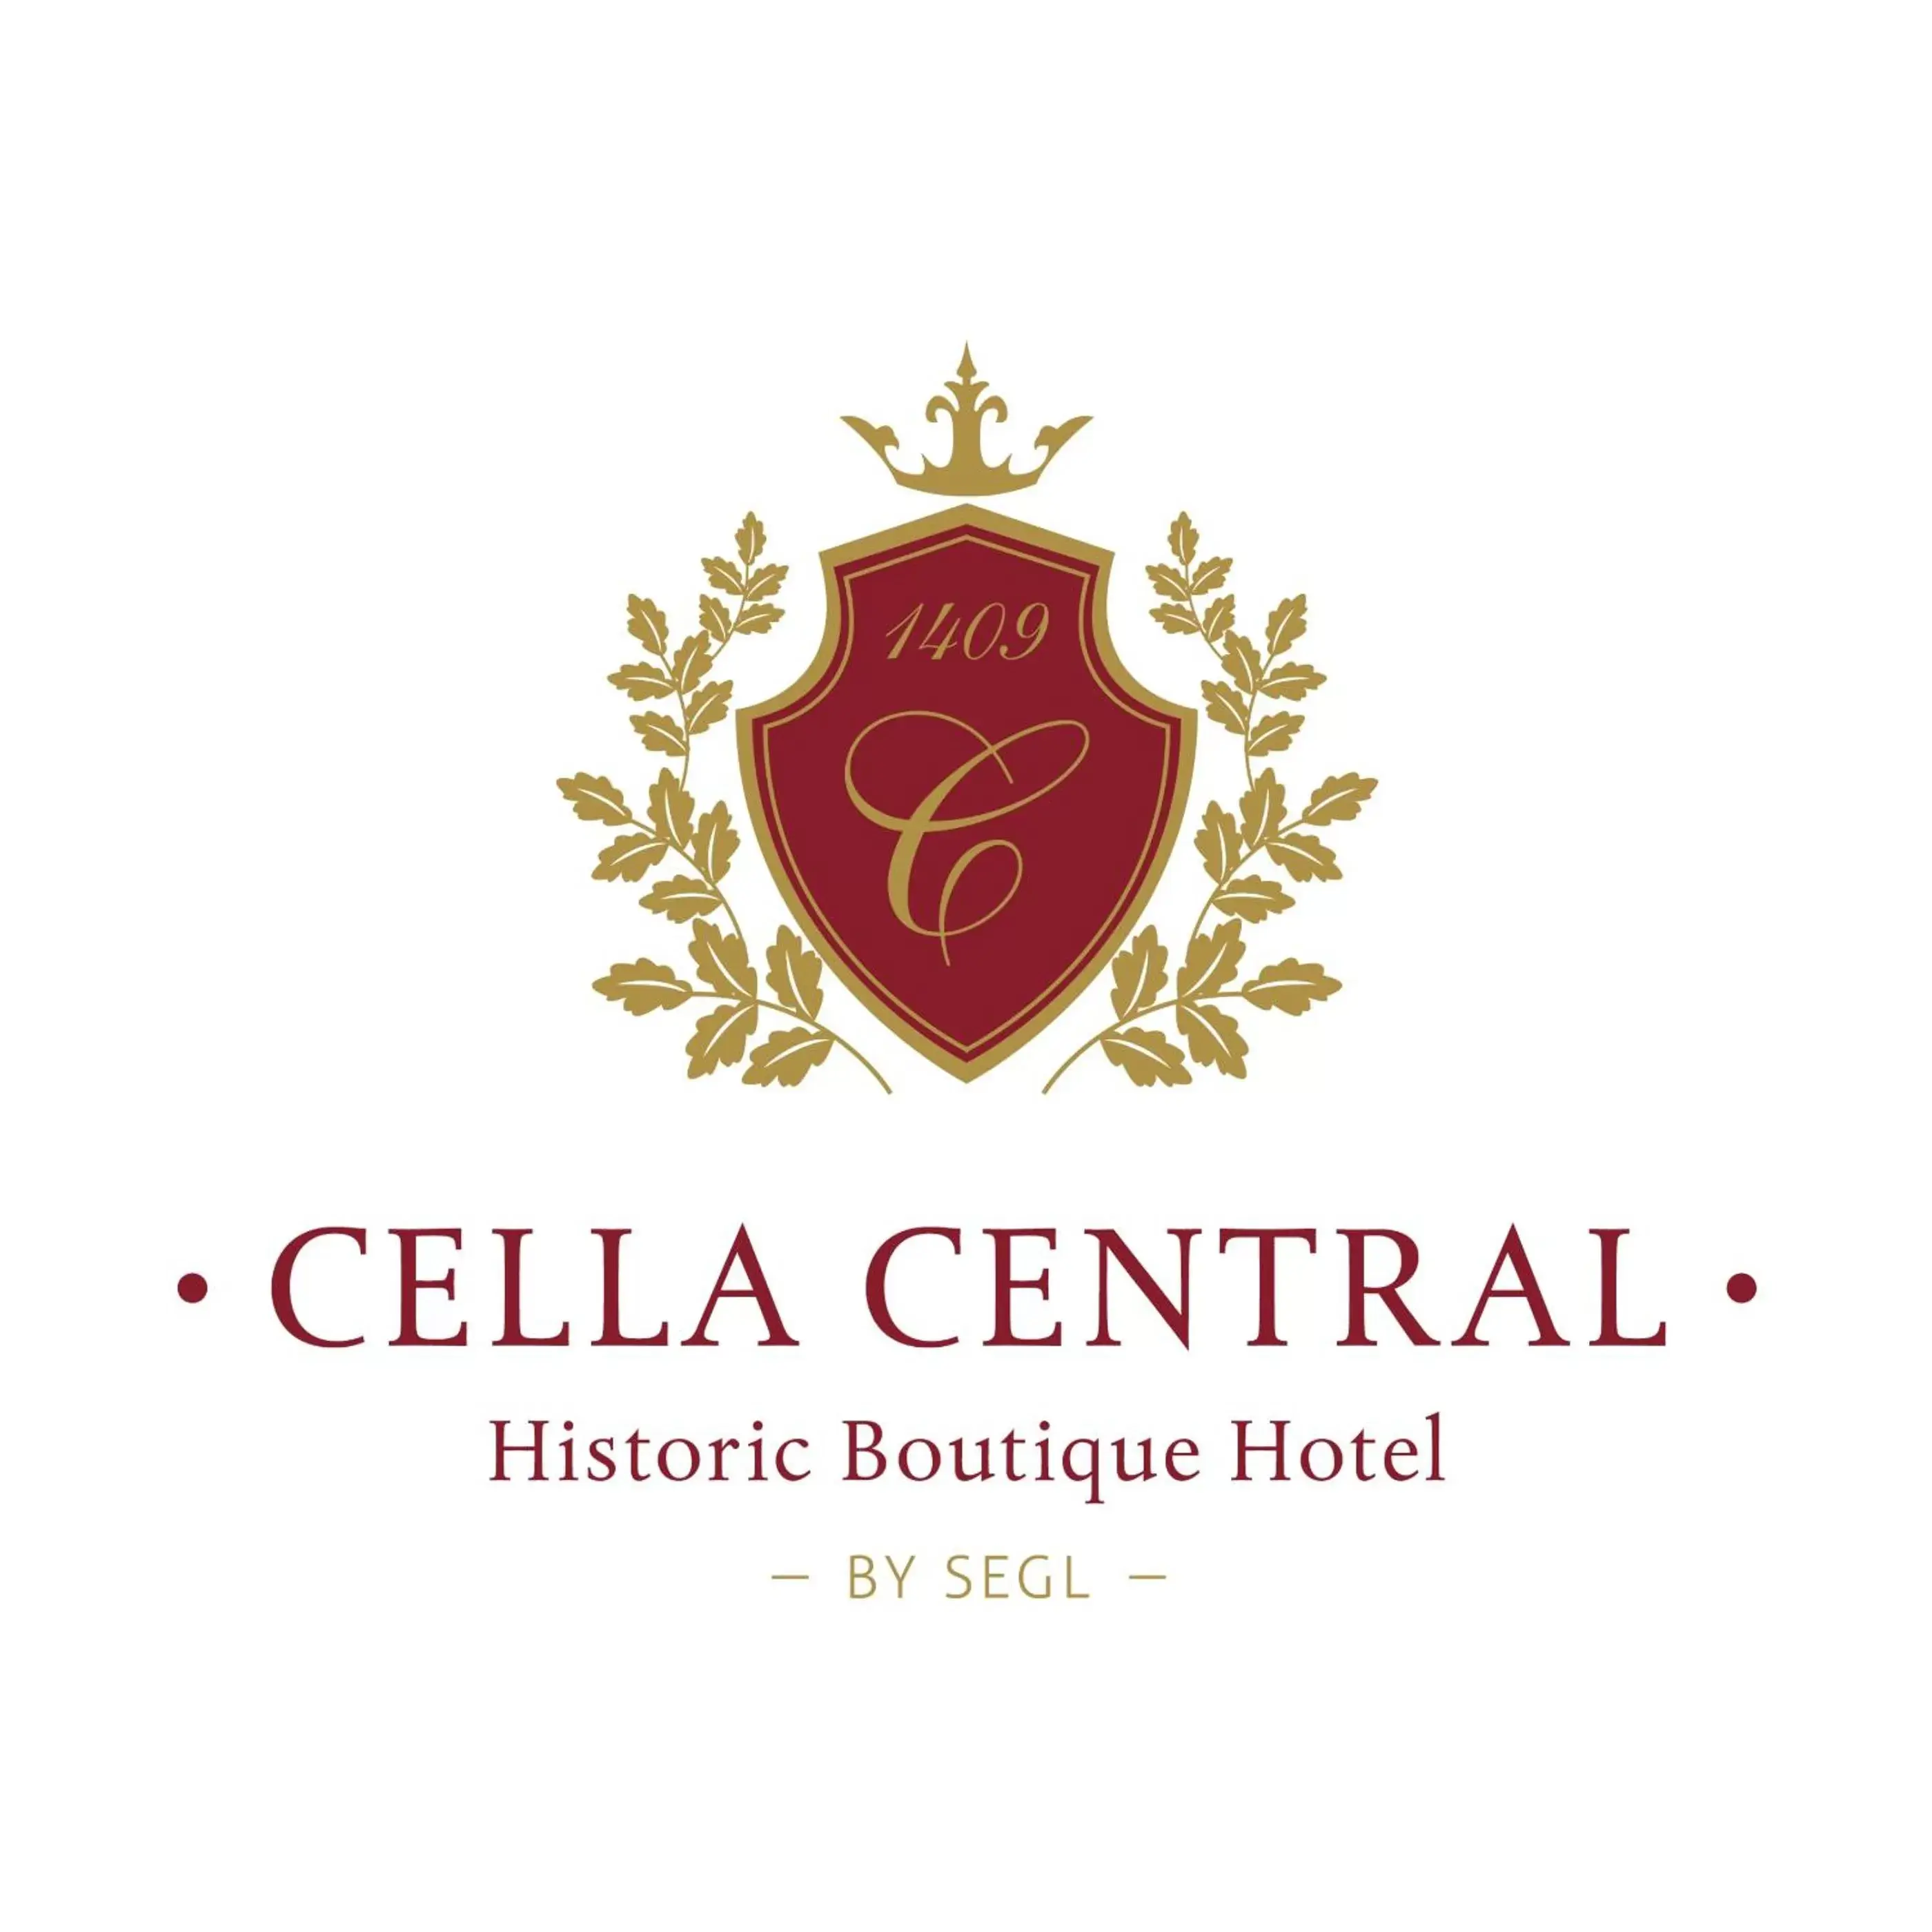 Property logo or sign, Property Logo/Sign in Cella Central Historic Boutique Hotel